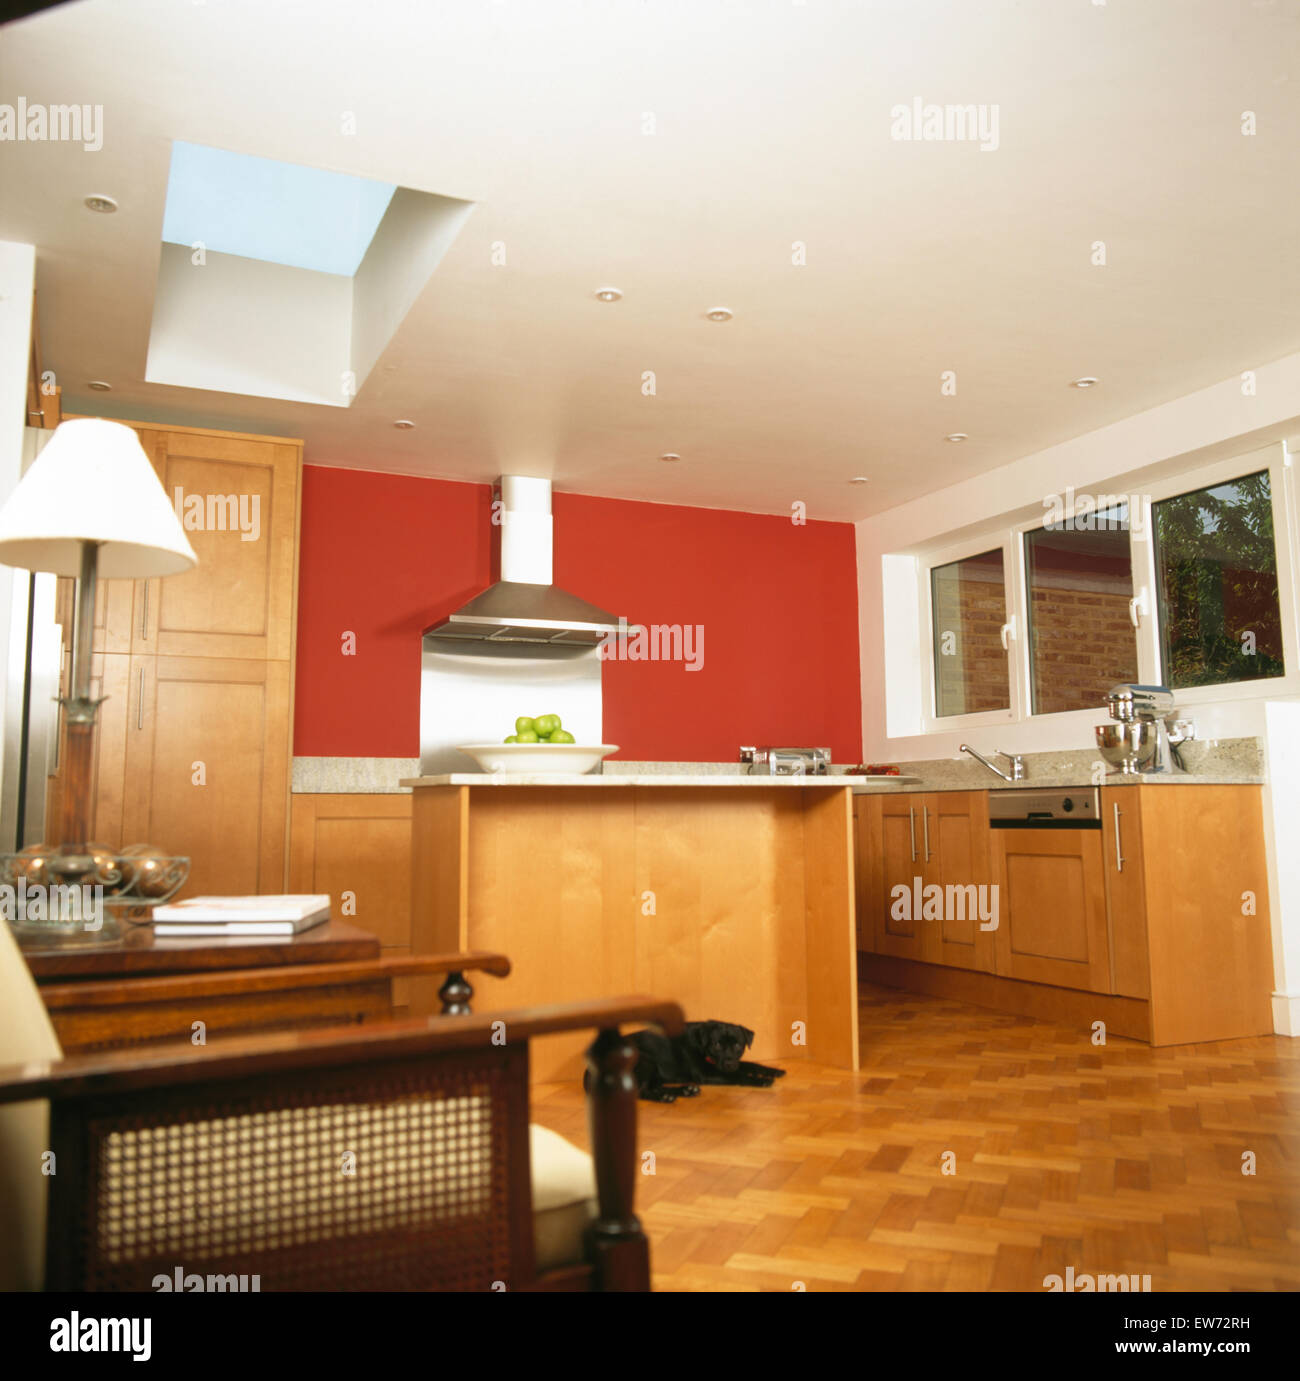 Parquet flooring in modern kitchen extension with red wall and pale wood units Stock Photo